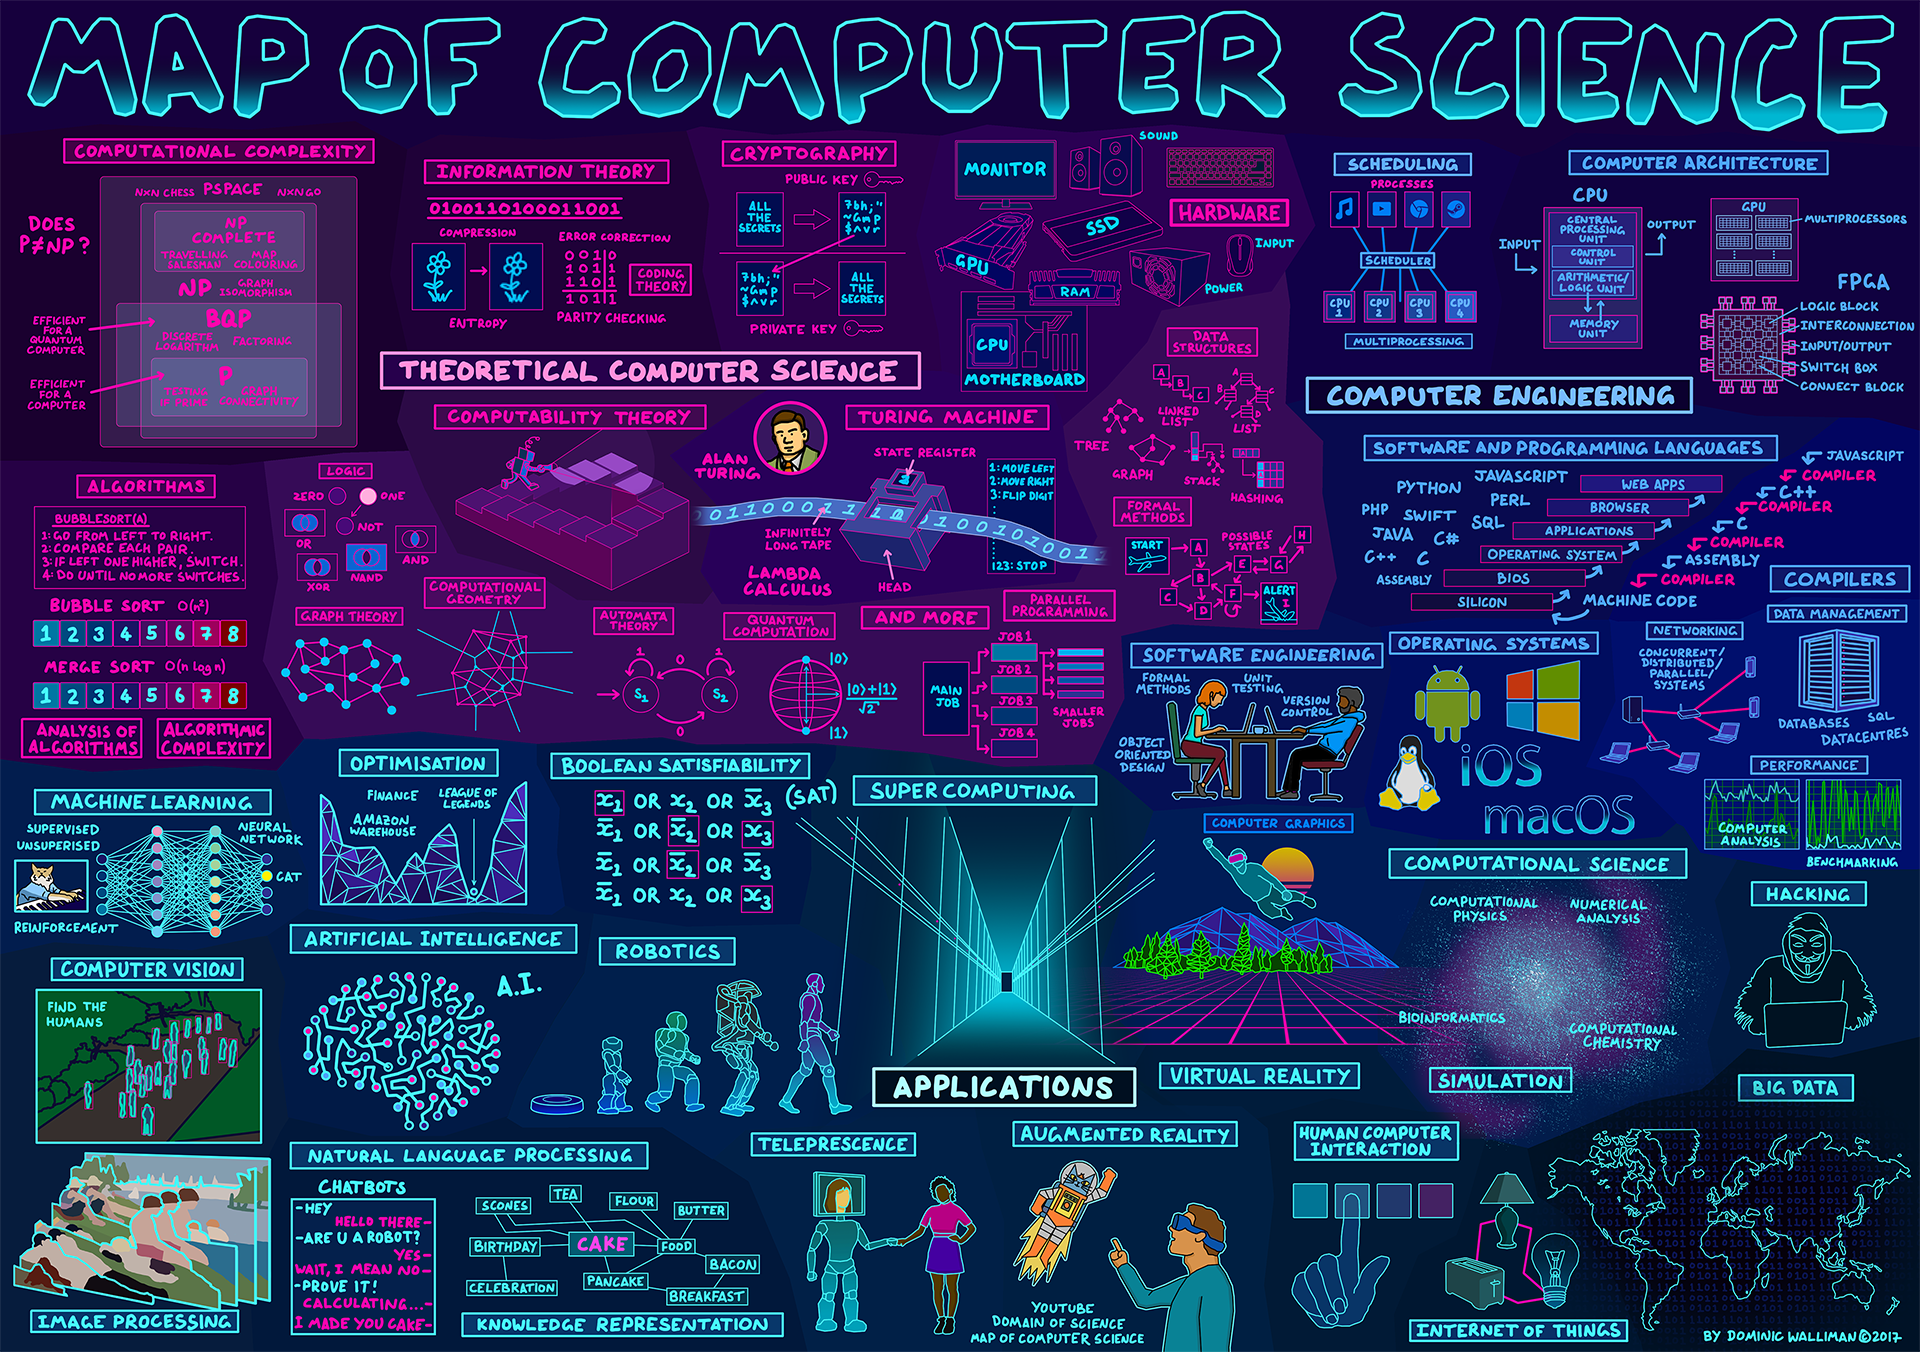 Roadmap of Computer Science and Engineering